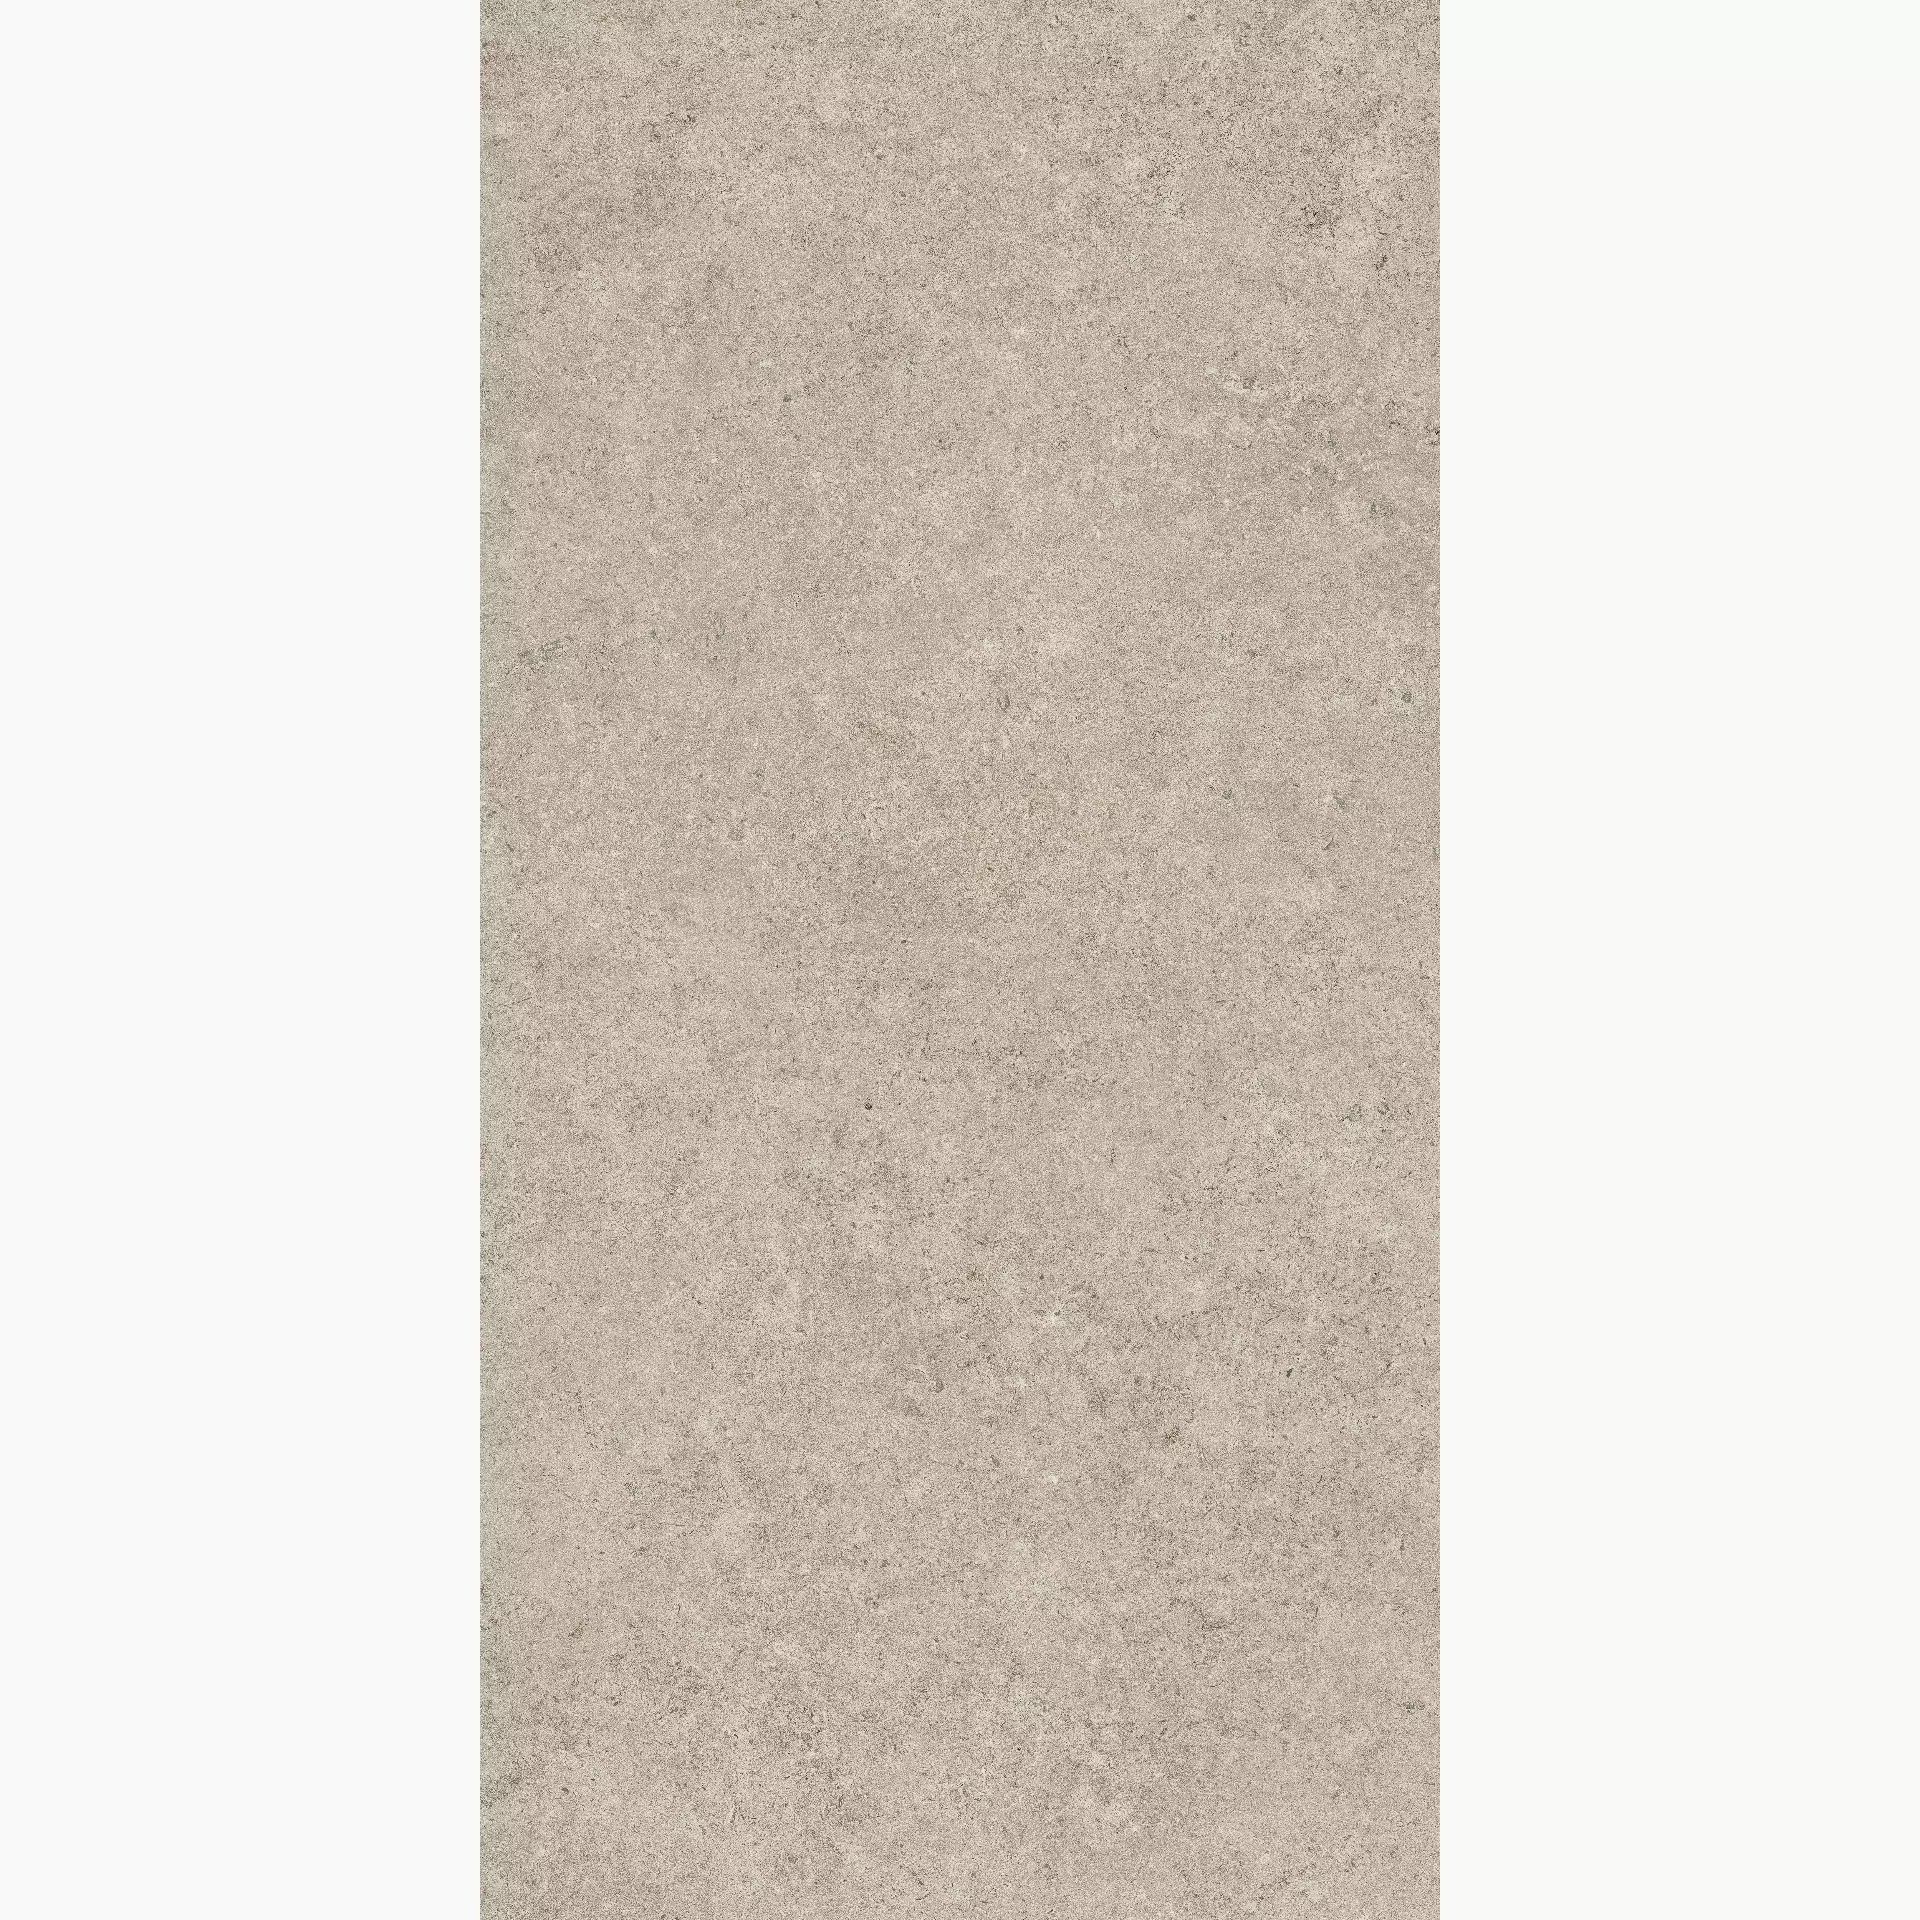 Cottodeste Pura Sand Hammered Protect EGXPR80 60x120cm rectified 20mm